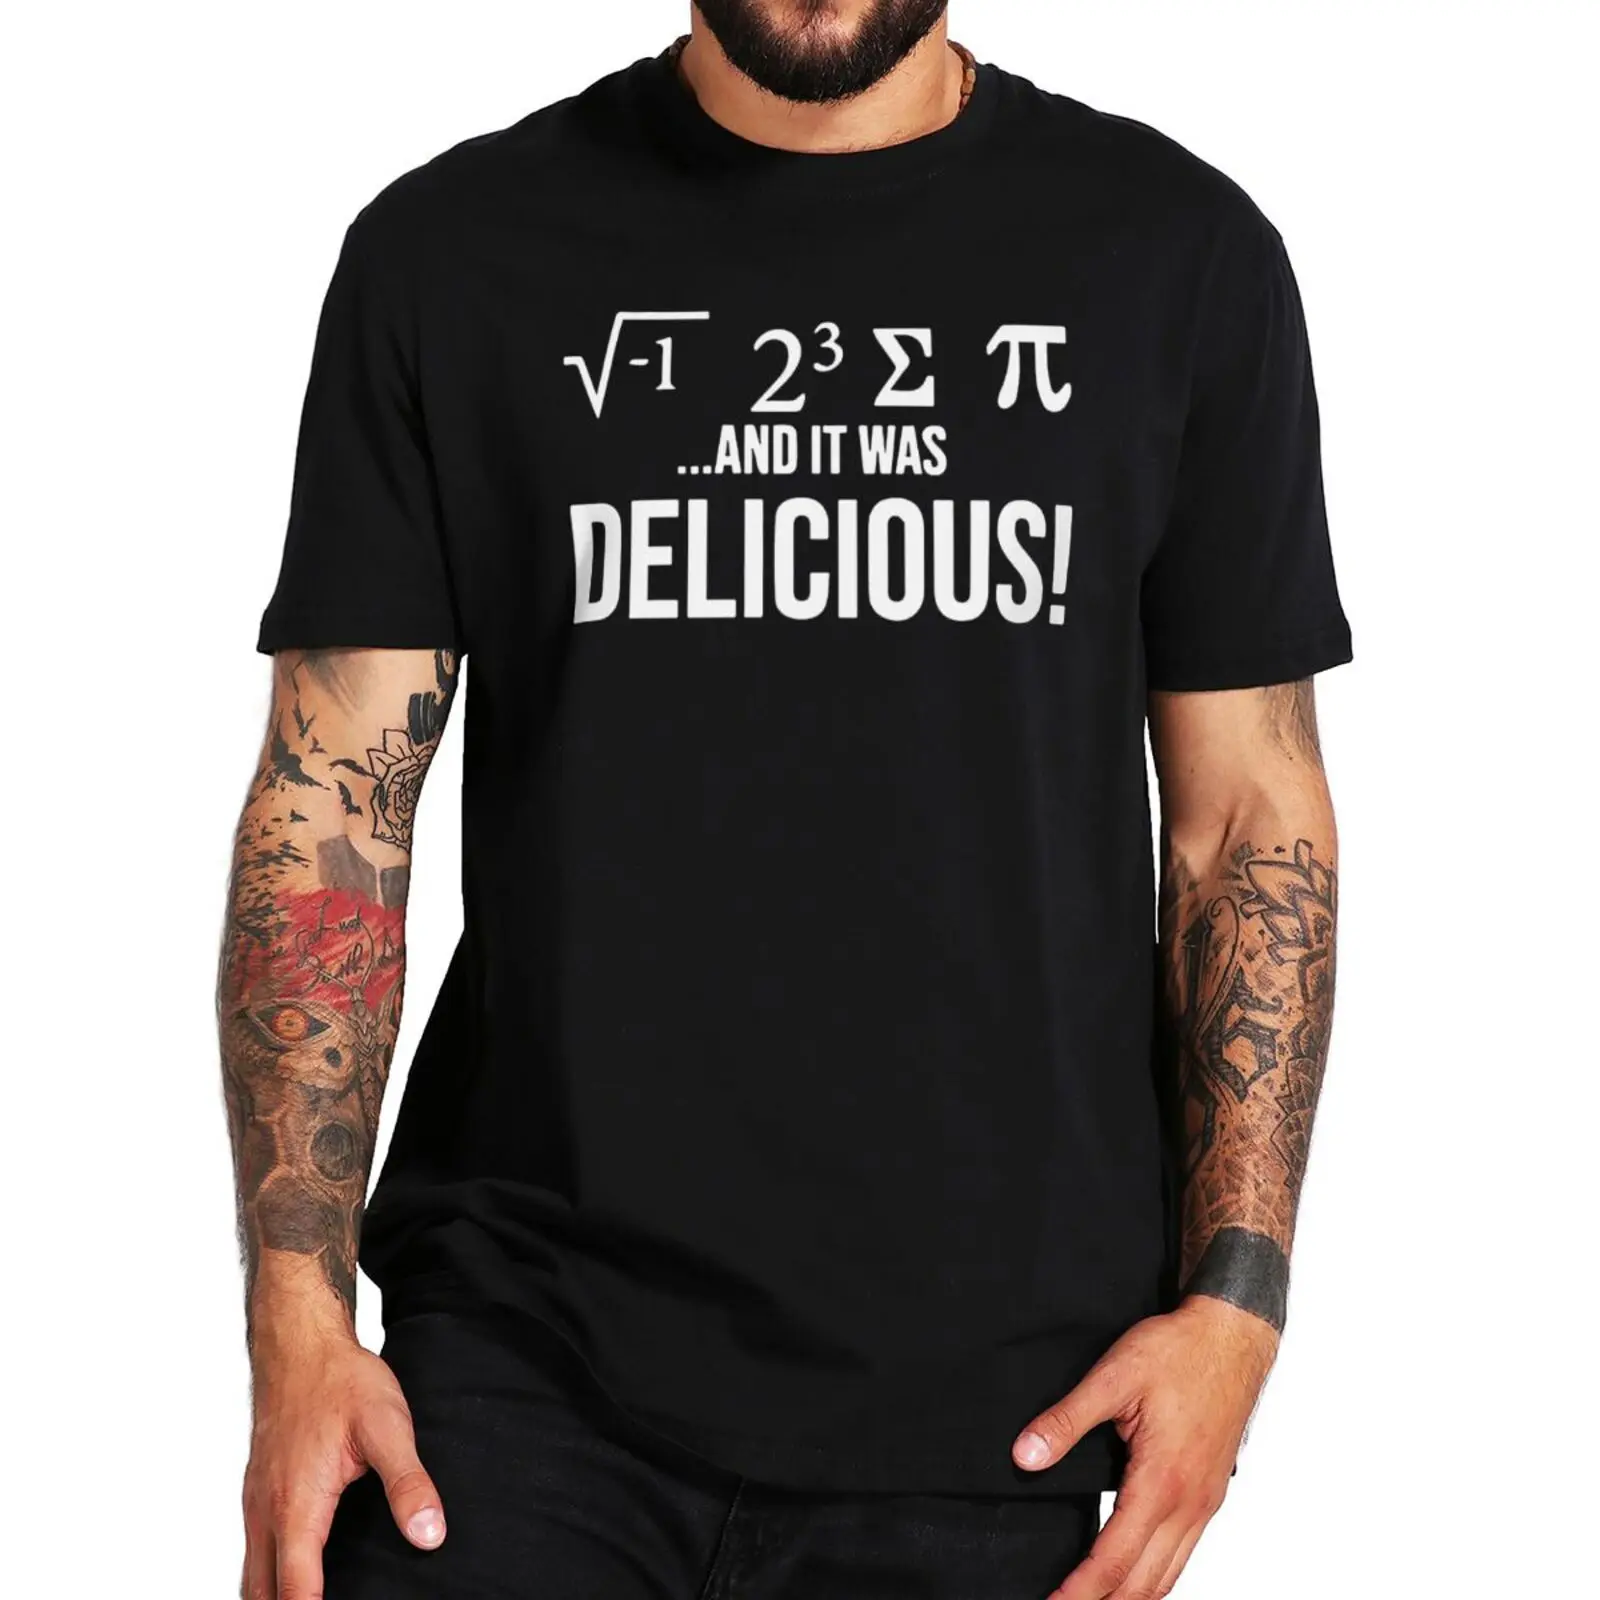 I Ate Some Pie And It Was Delicious Tshirt Geek Nerd Math Tee Top Ate Sum Pi Slogan Men's T-Shirt 100% Cotton EU Size